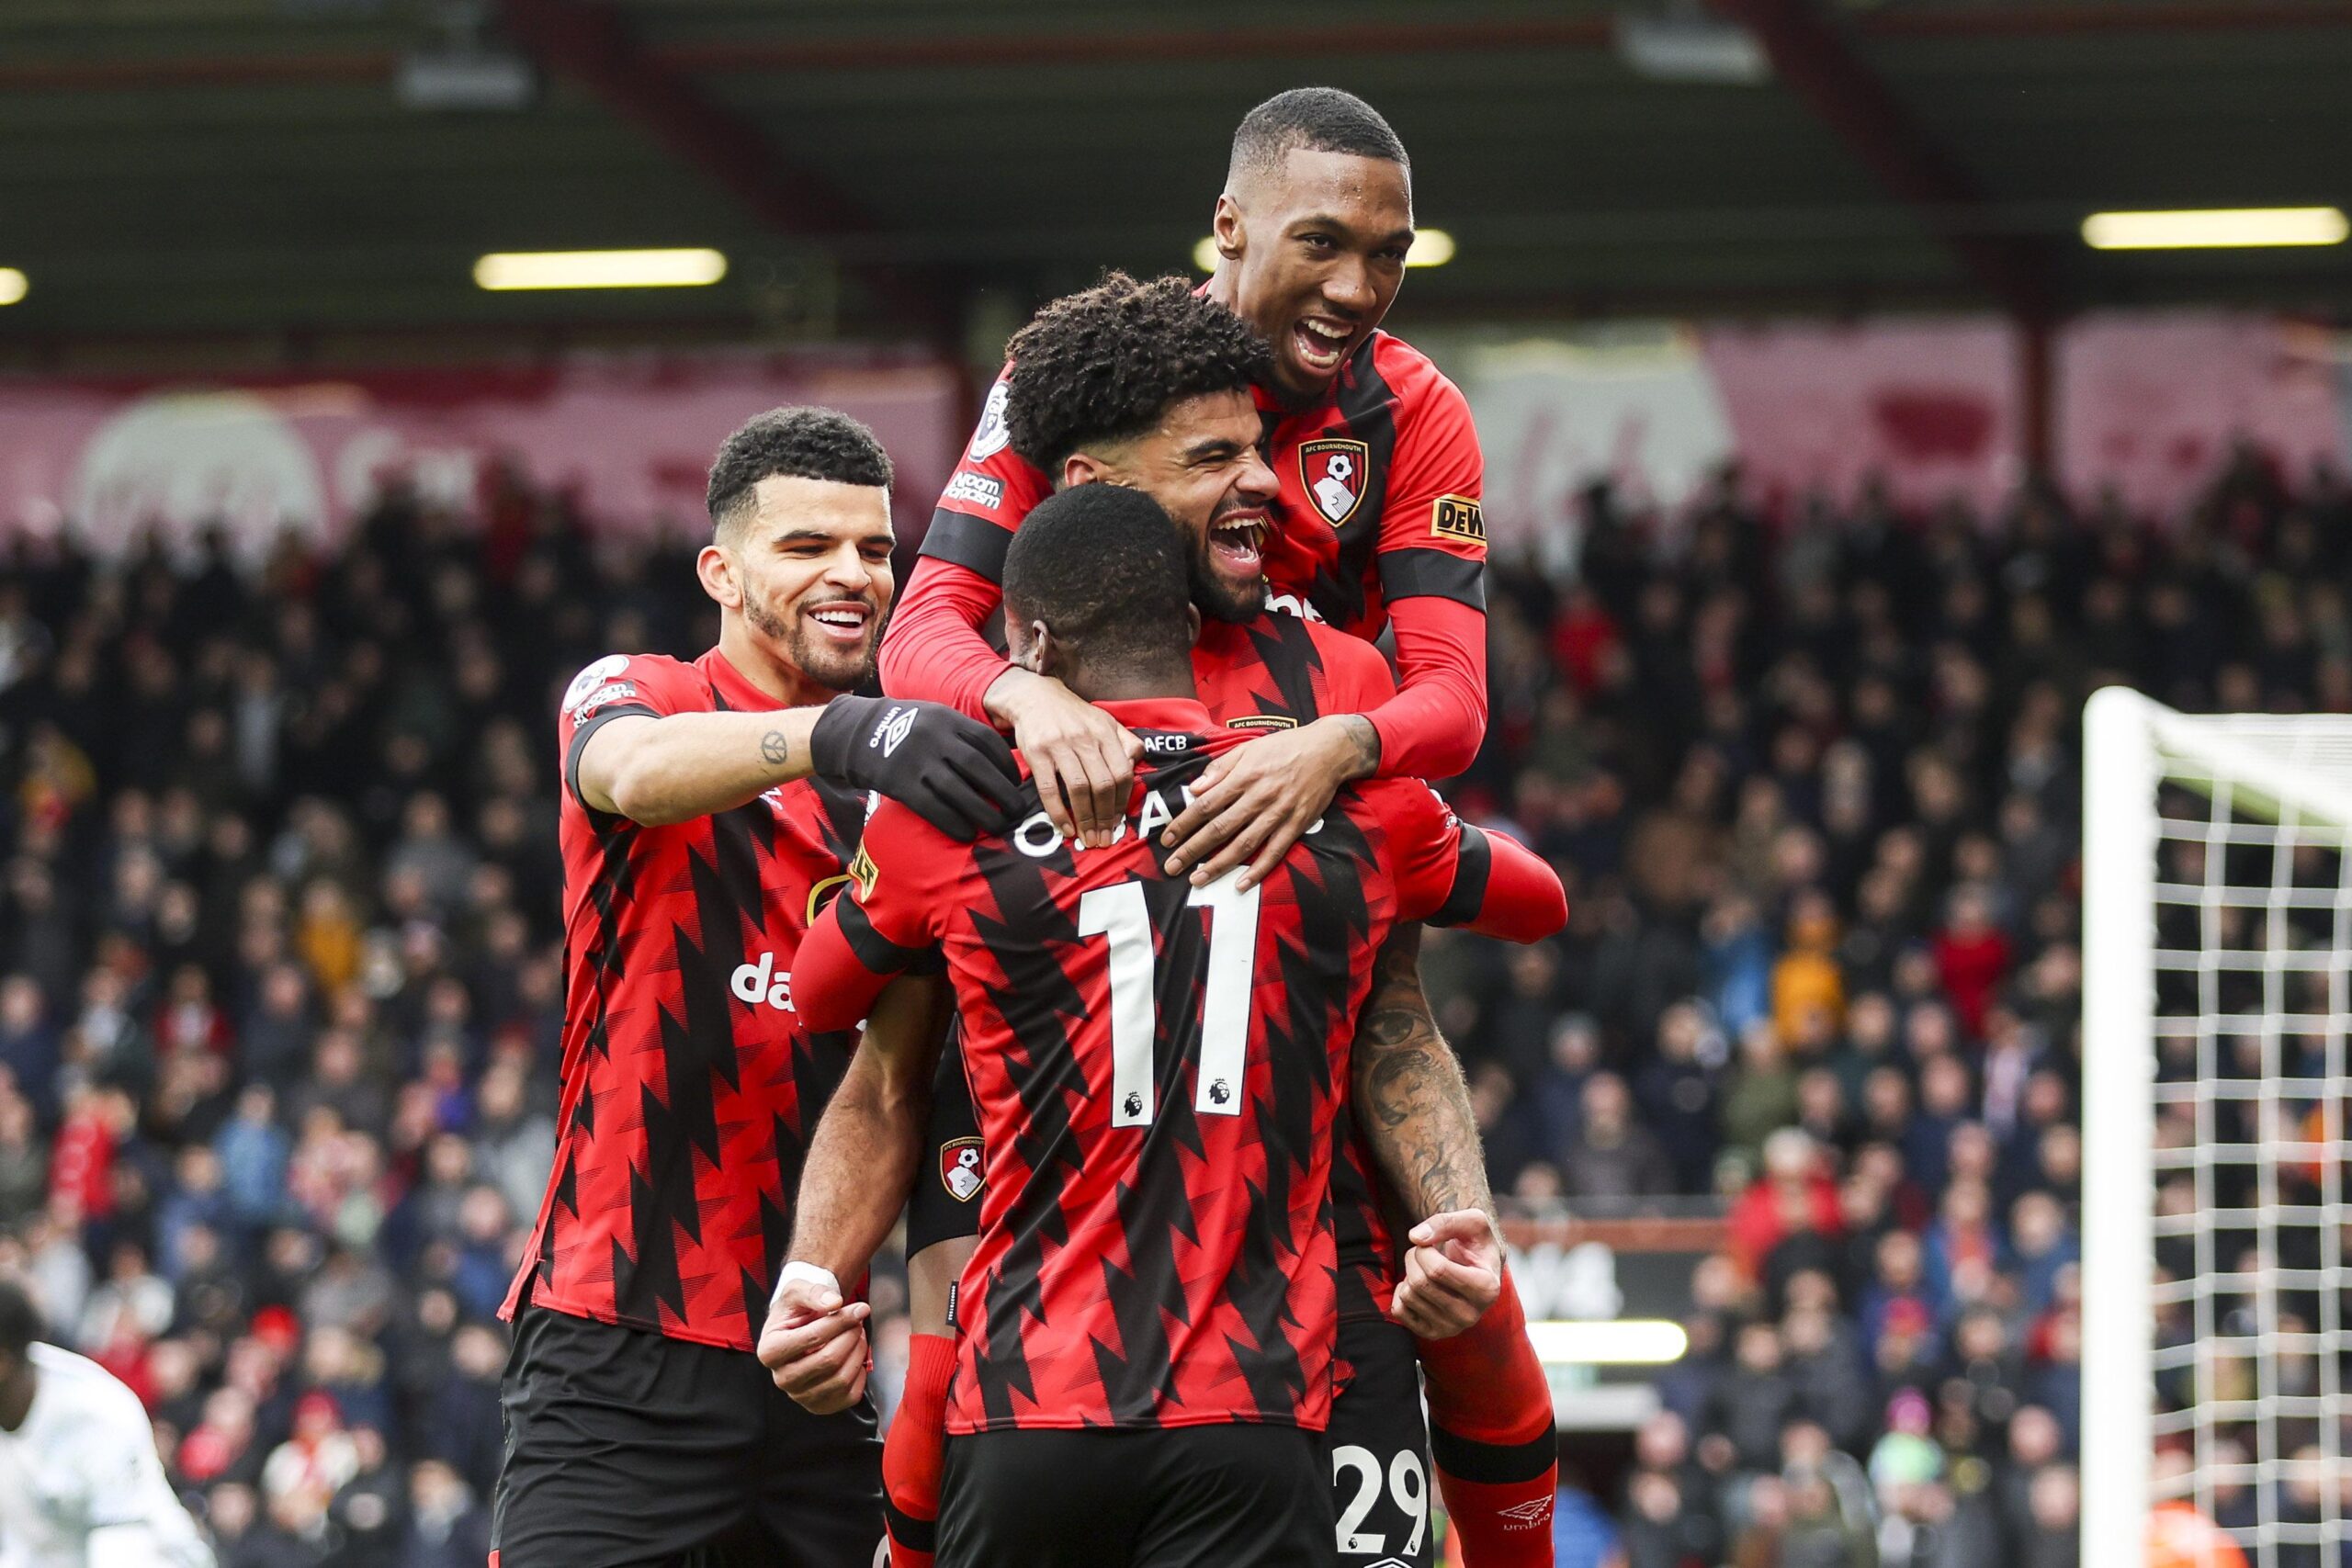 Philip Billing celebrating a goal with team mates.